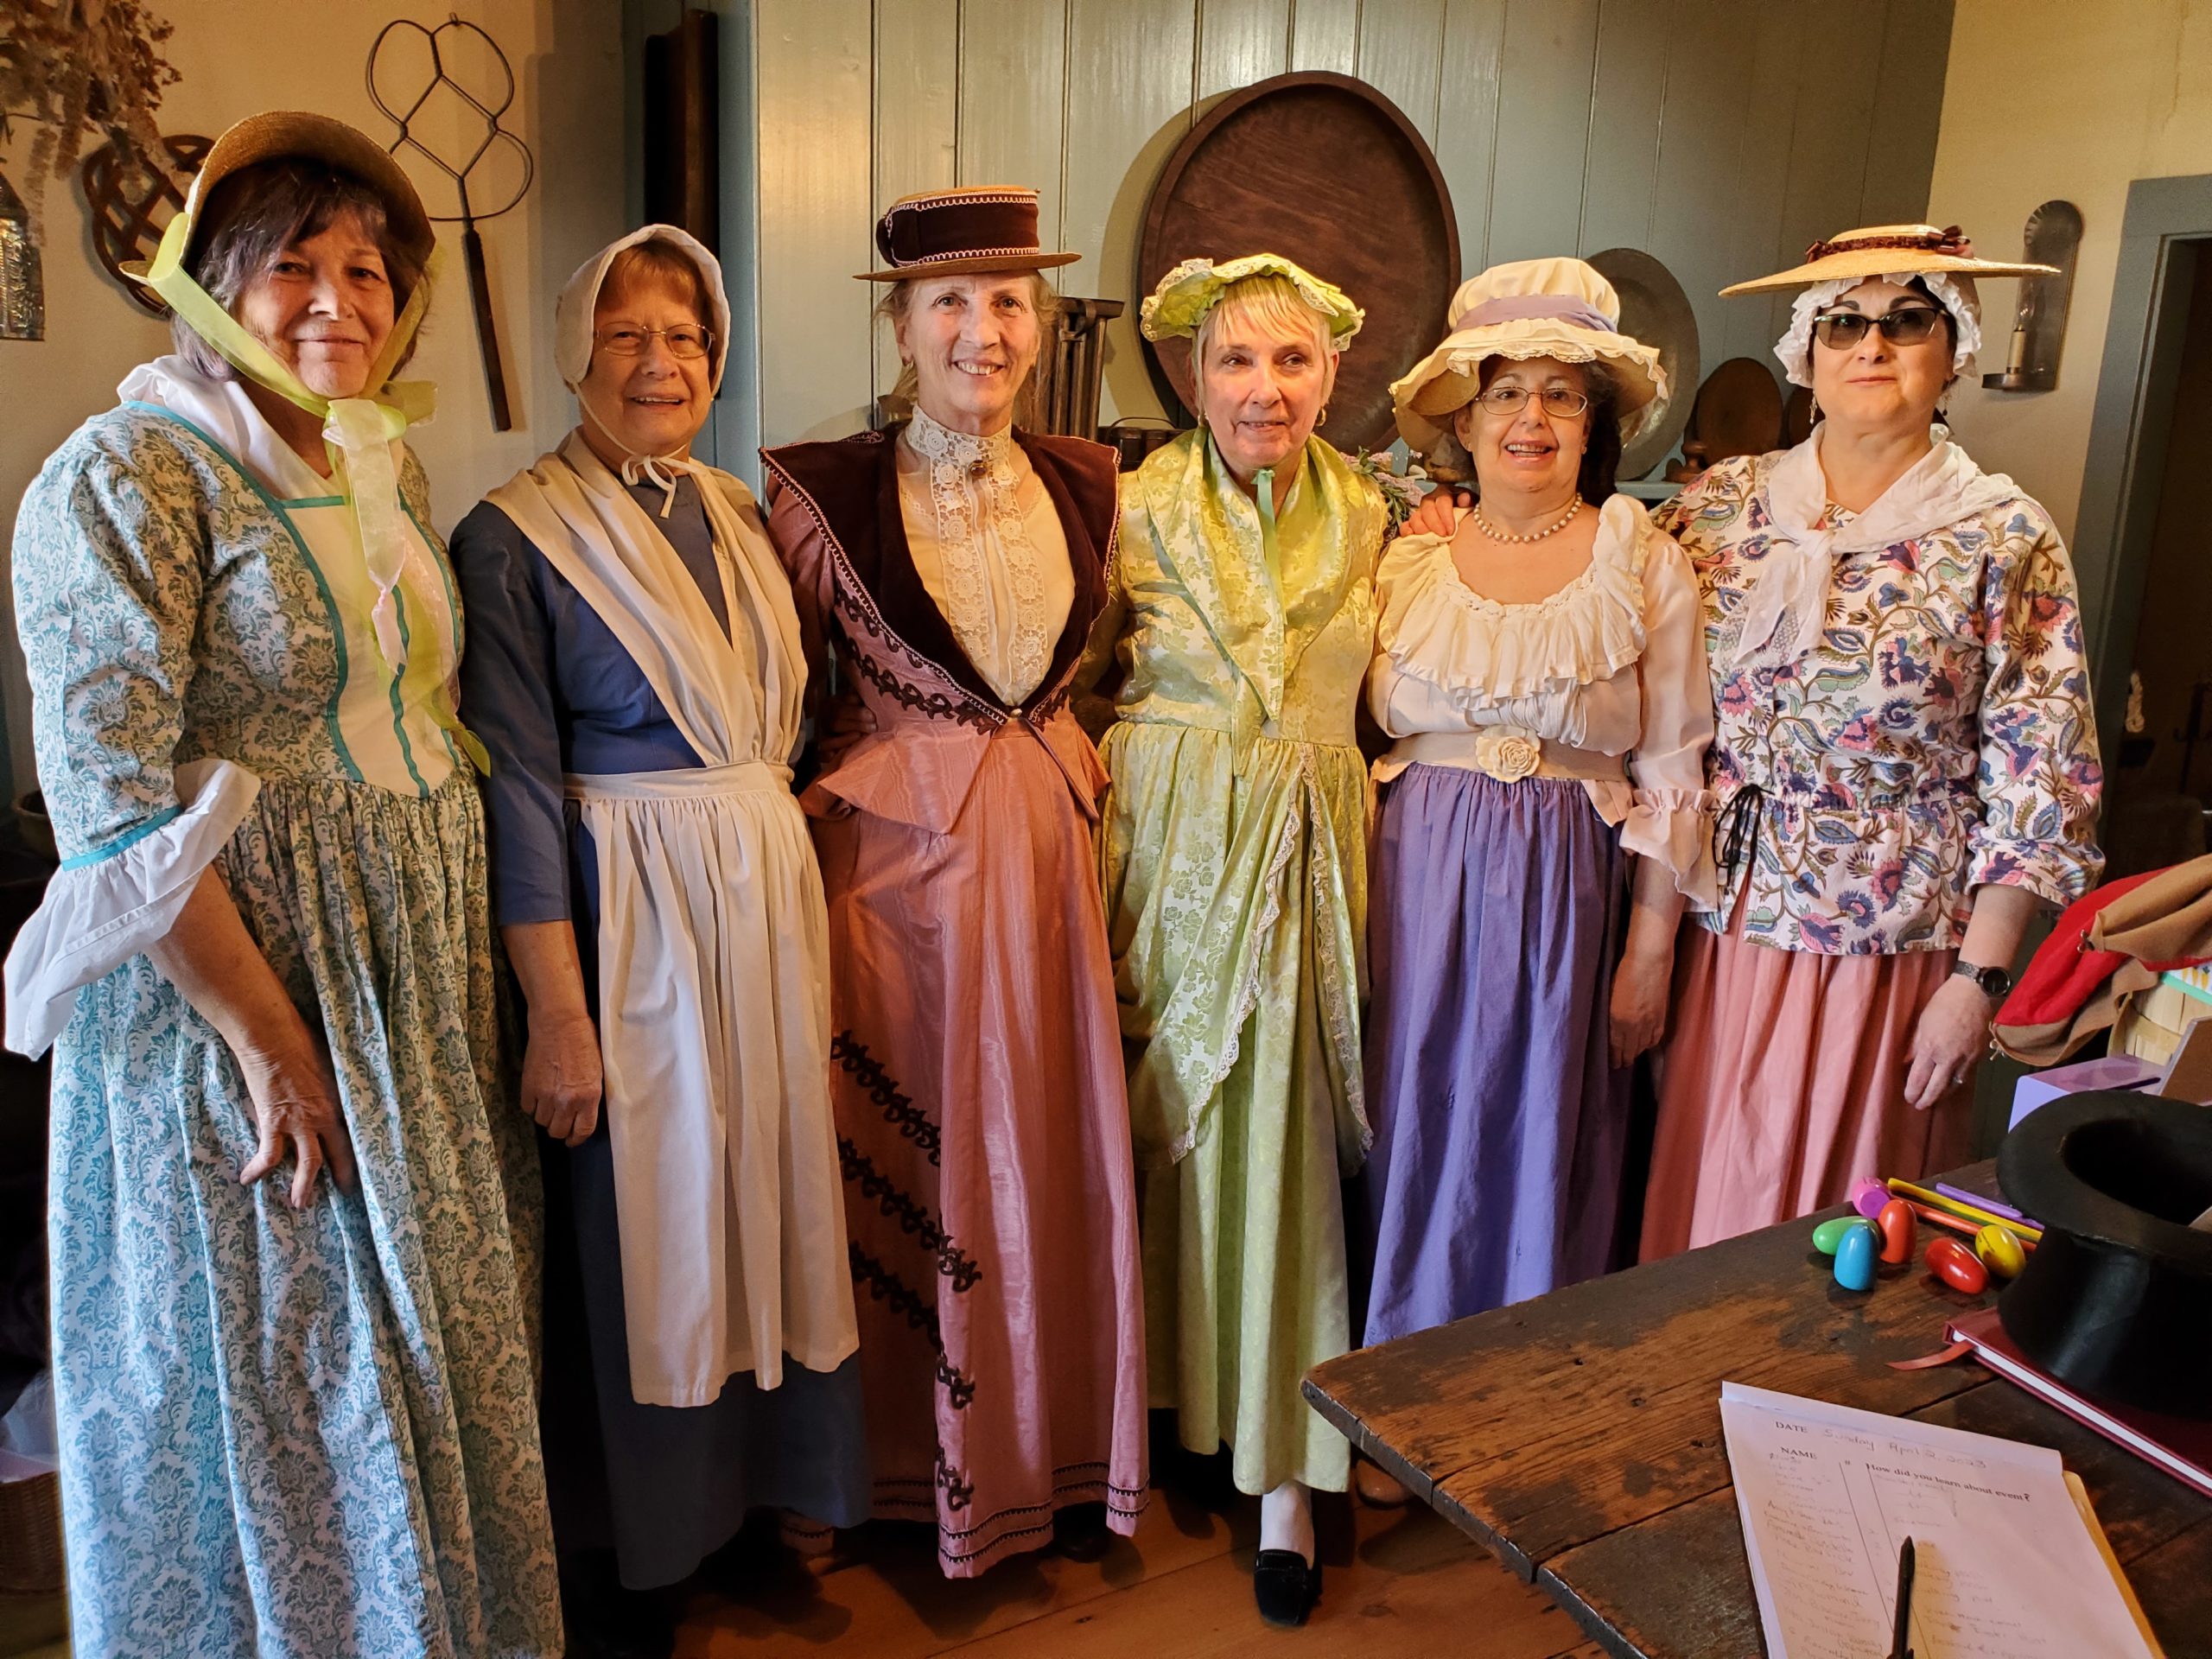 Six ladies dressed in 18th and 19th century fashions in the kitchen of the Osborn Cannonball House Museum